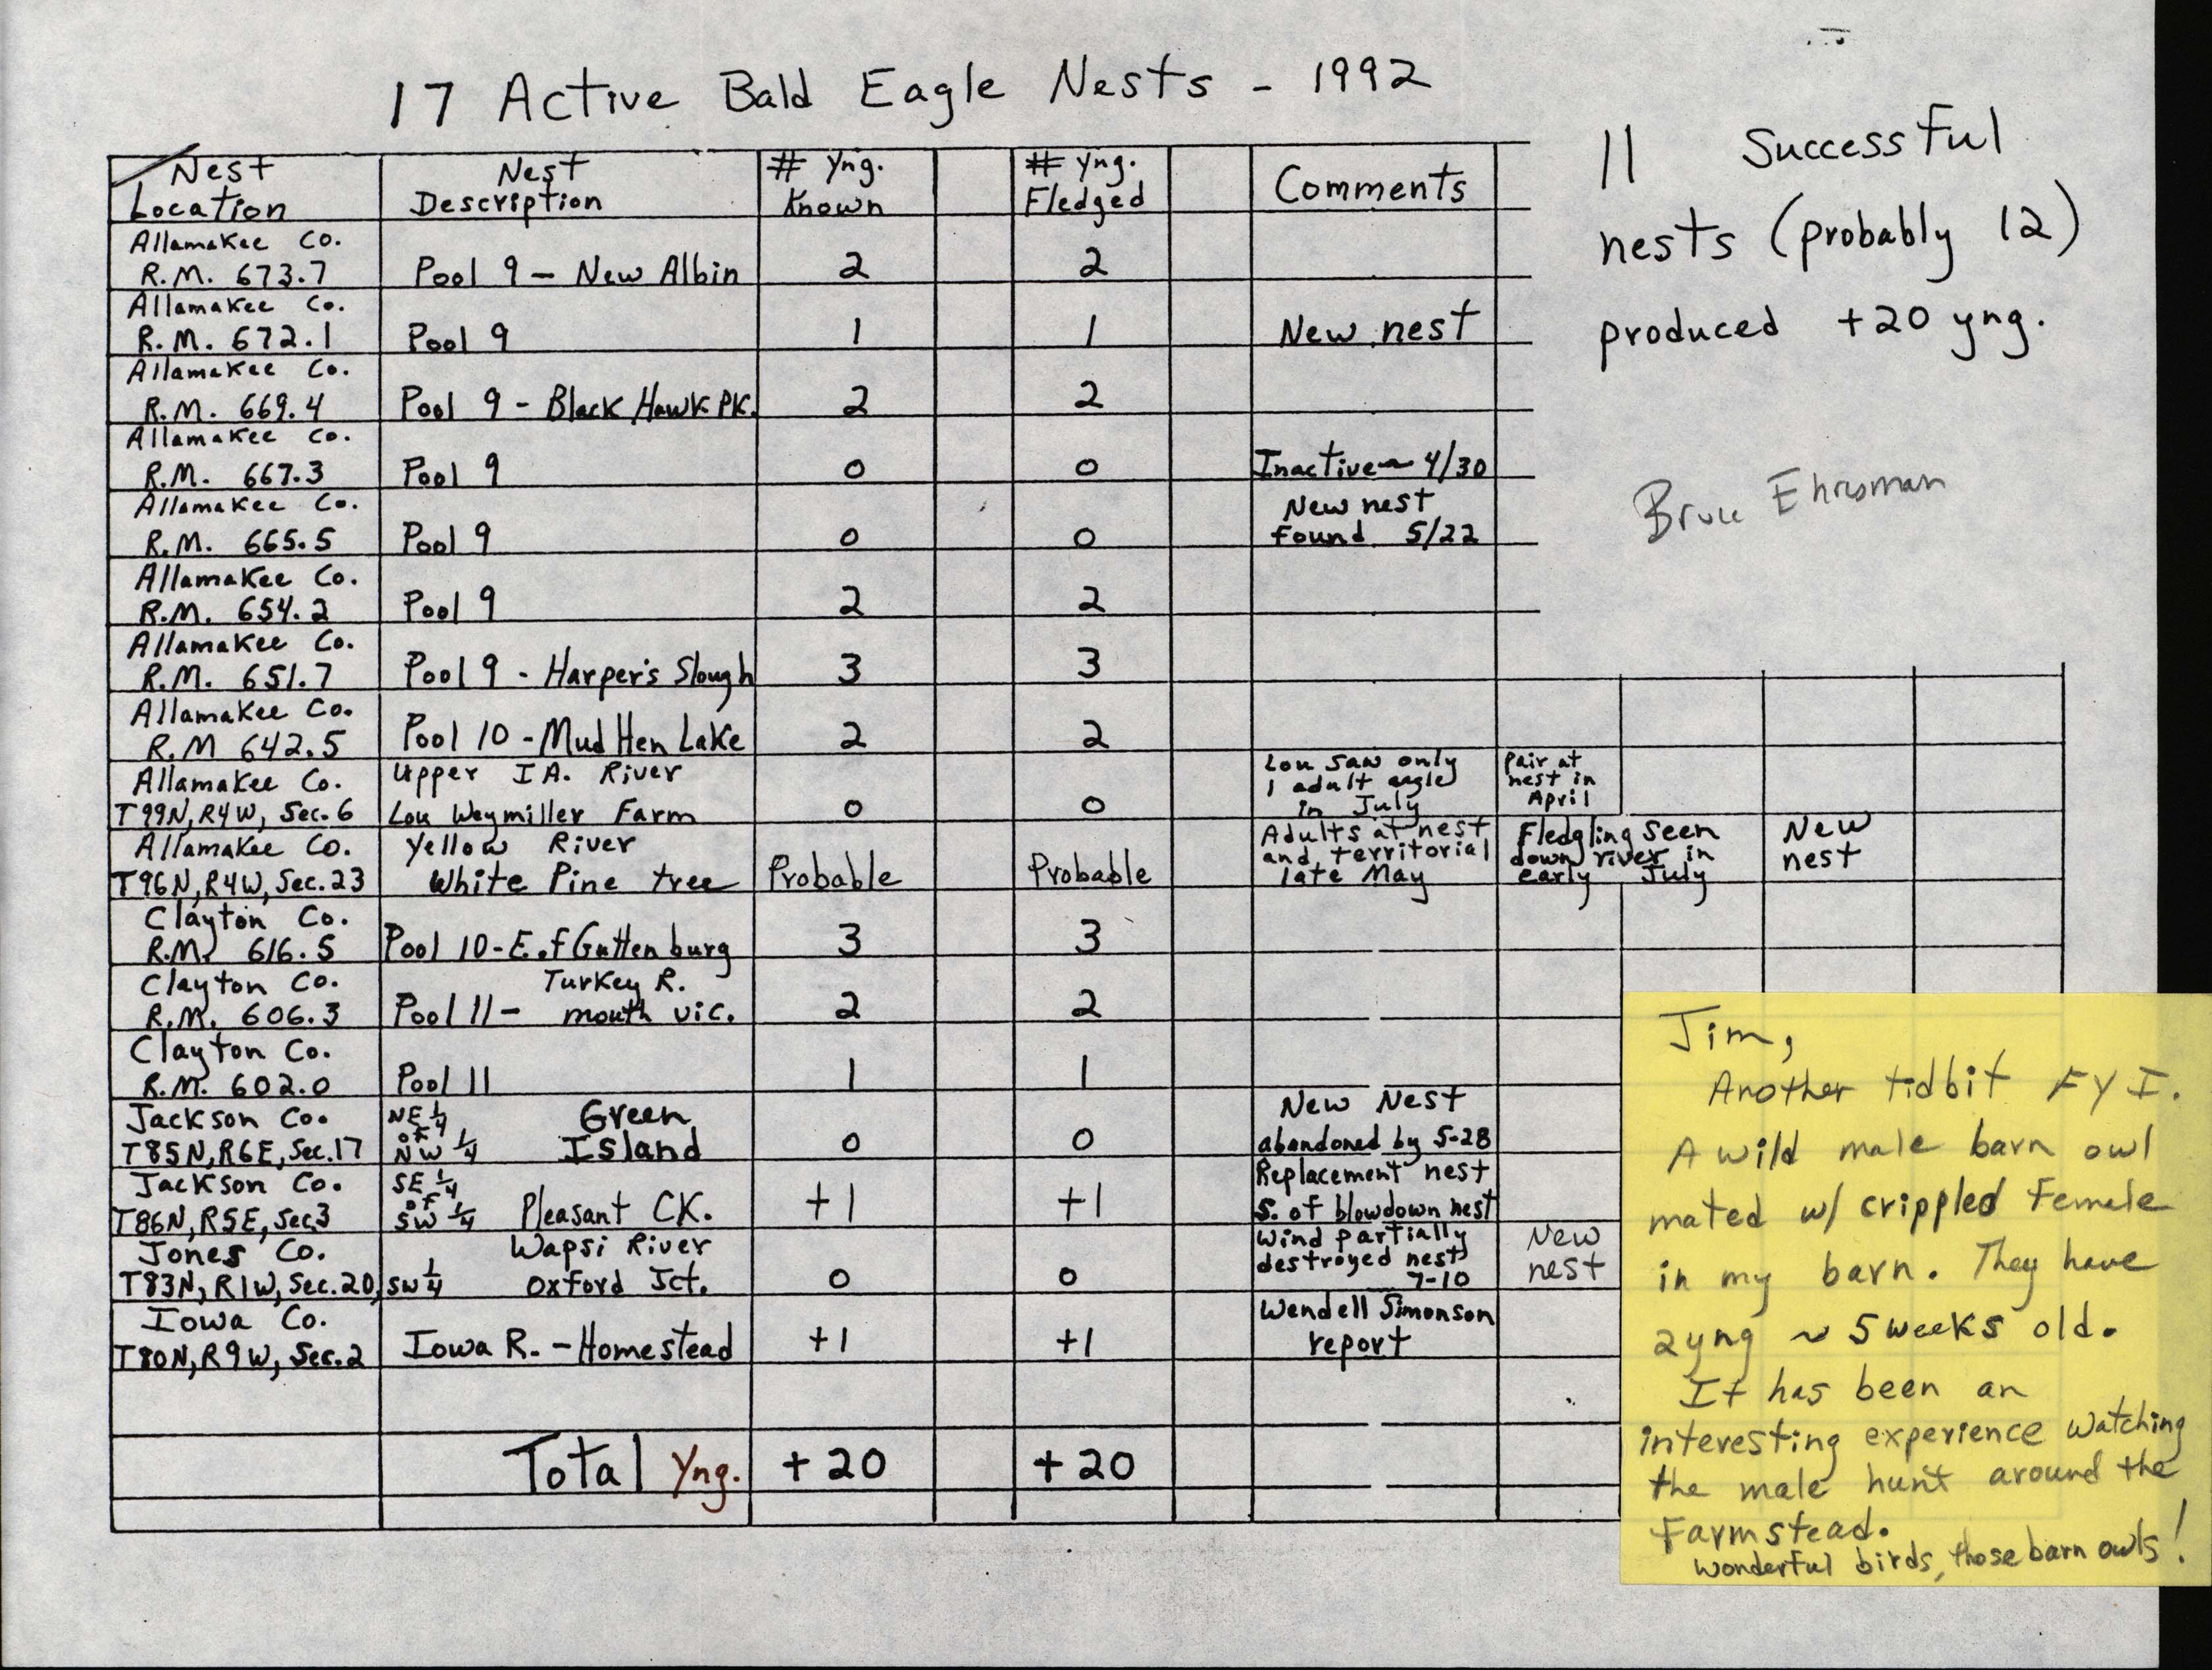 Field notes about active Bald Eagle nests contributed by Bruce Ehresman, summer 1992